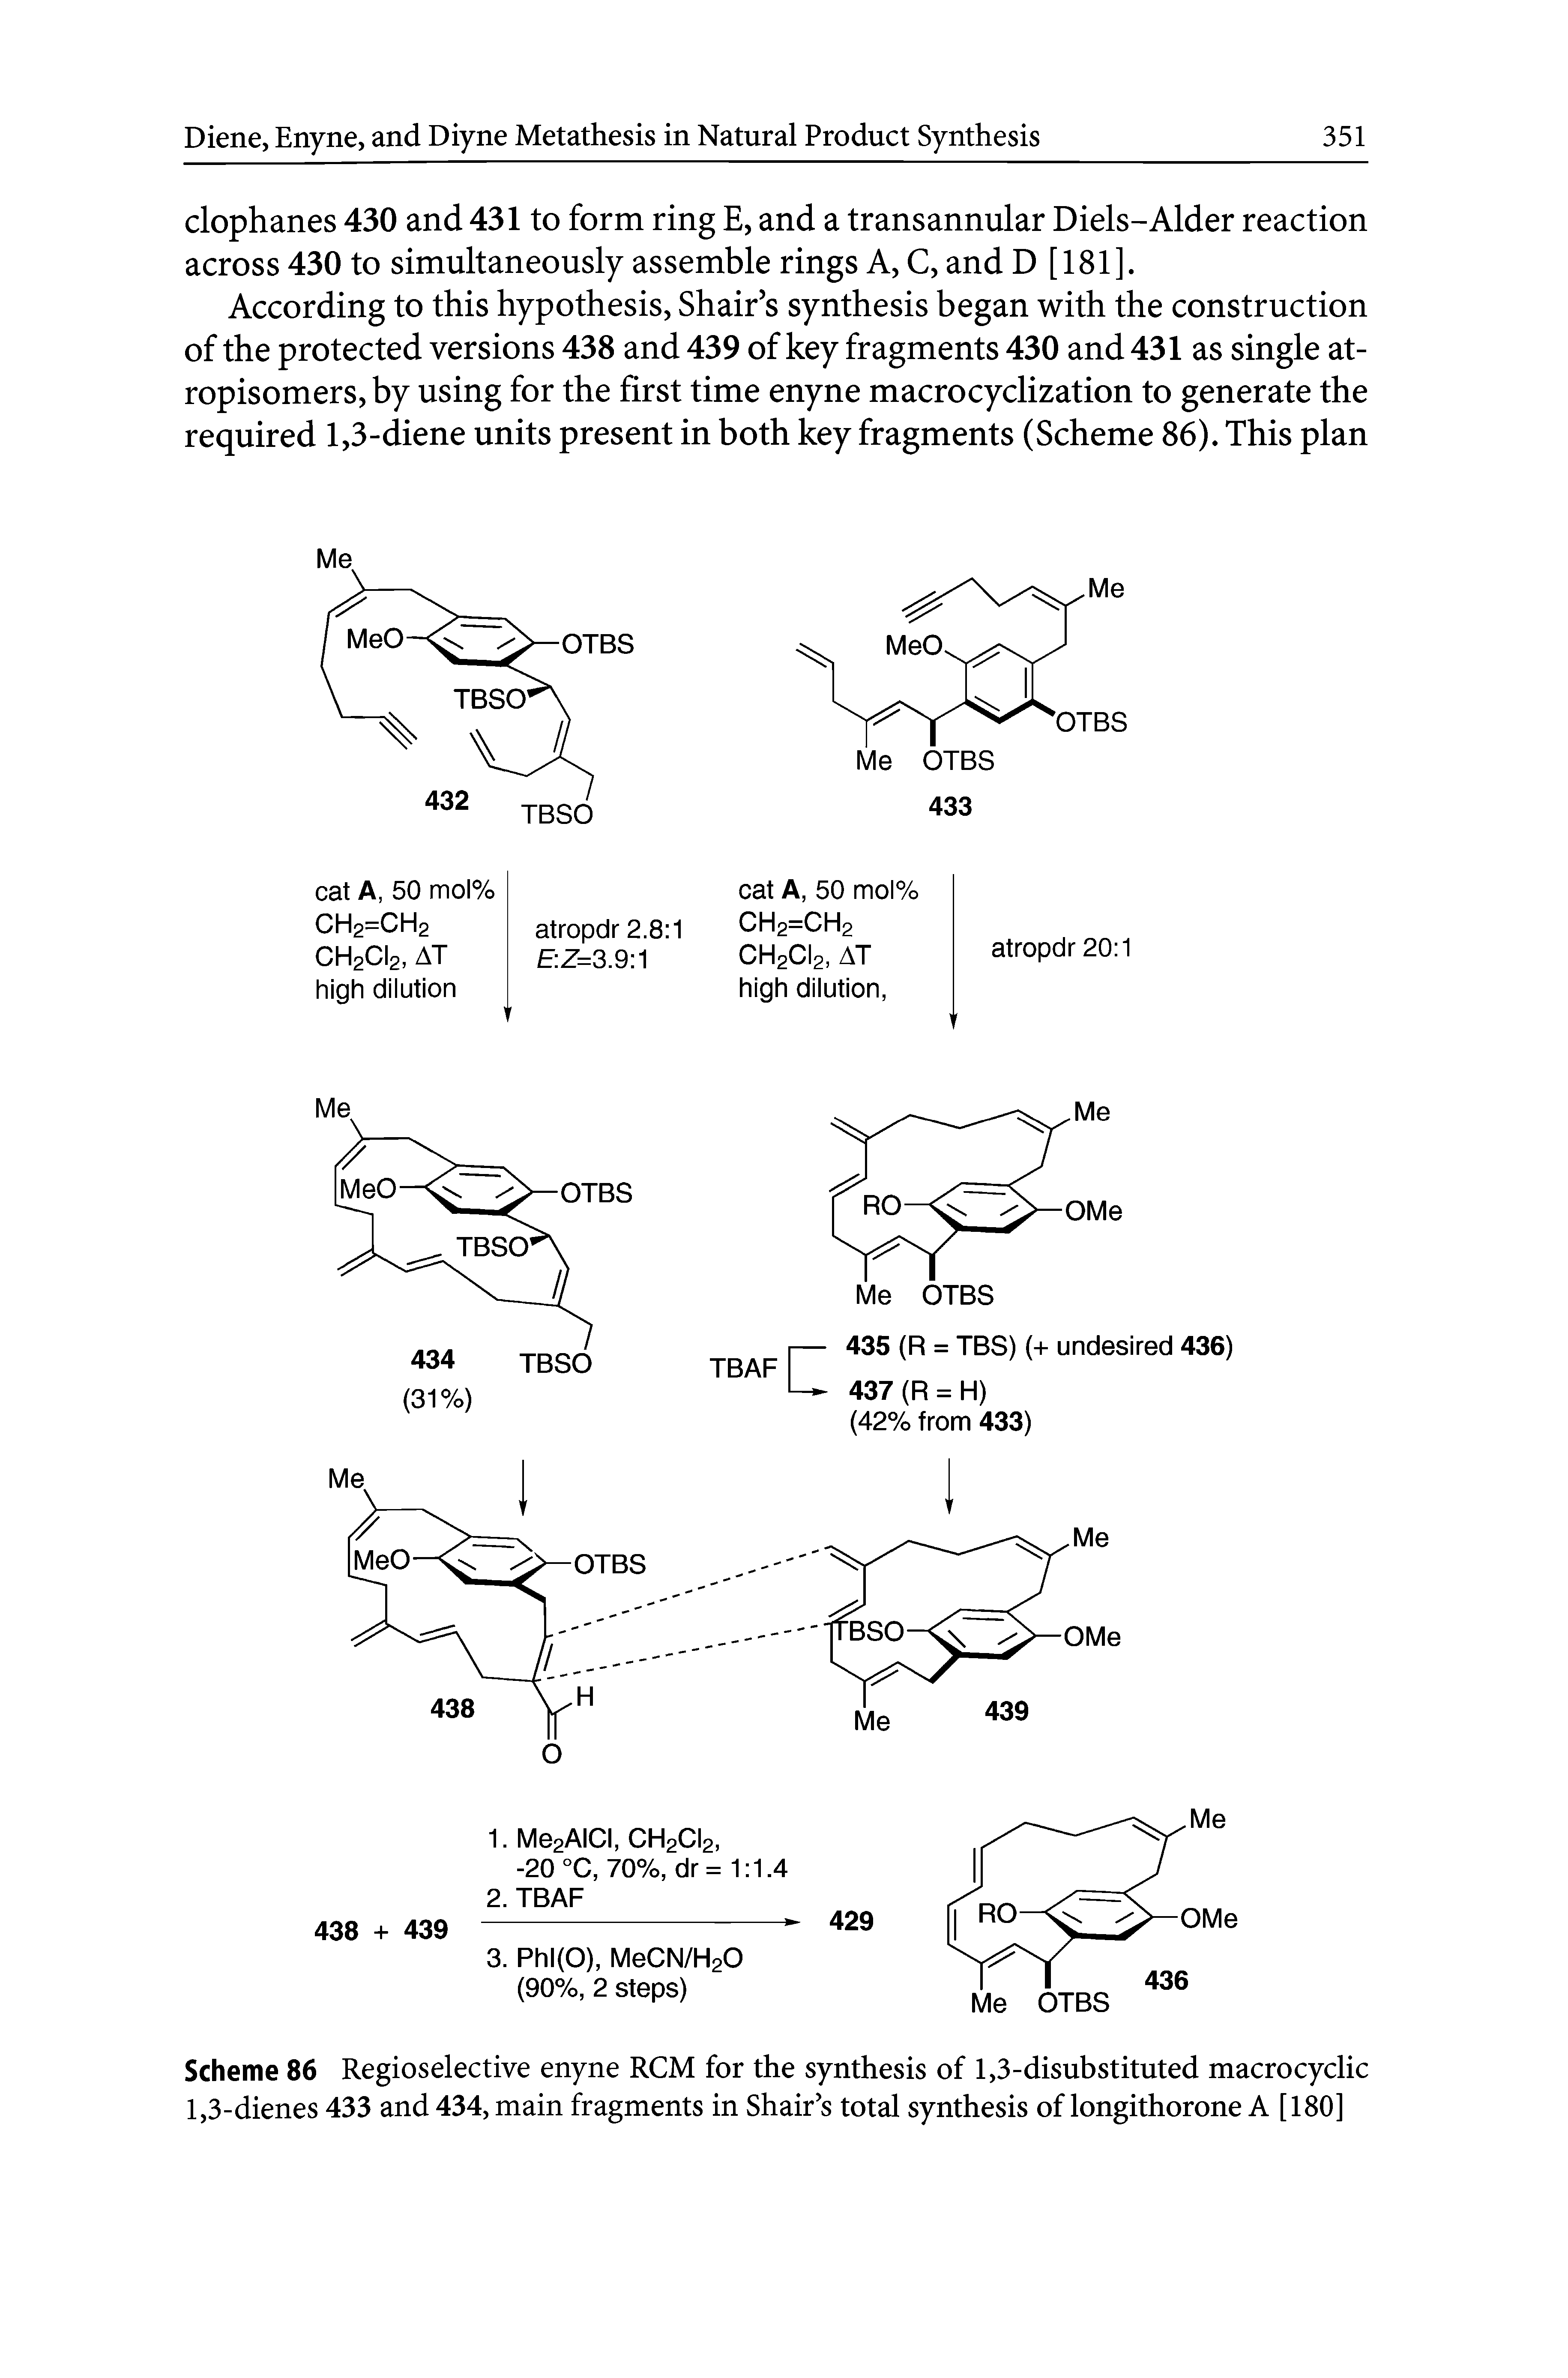 Scheme 86 Regioselective enyne RCM for the synthesis of 1,3-disubstituted macrocyclic 1,3-dienes 433 and 434, main fragments in Shair s total synthesis of longithorone A [180]...